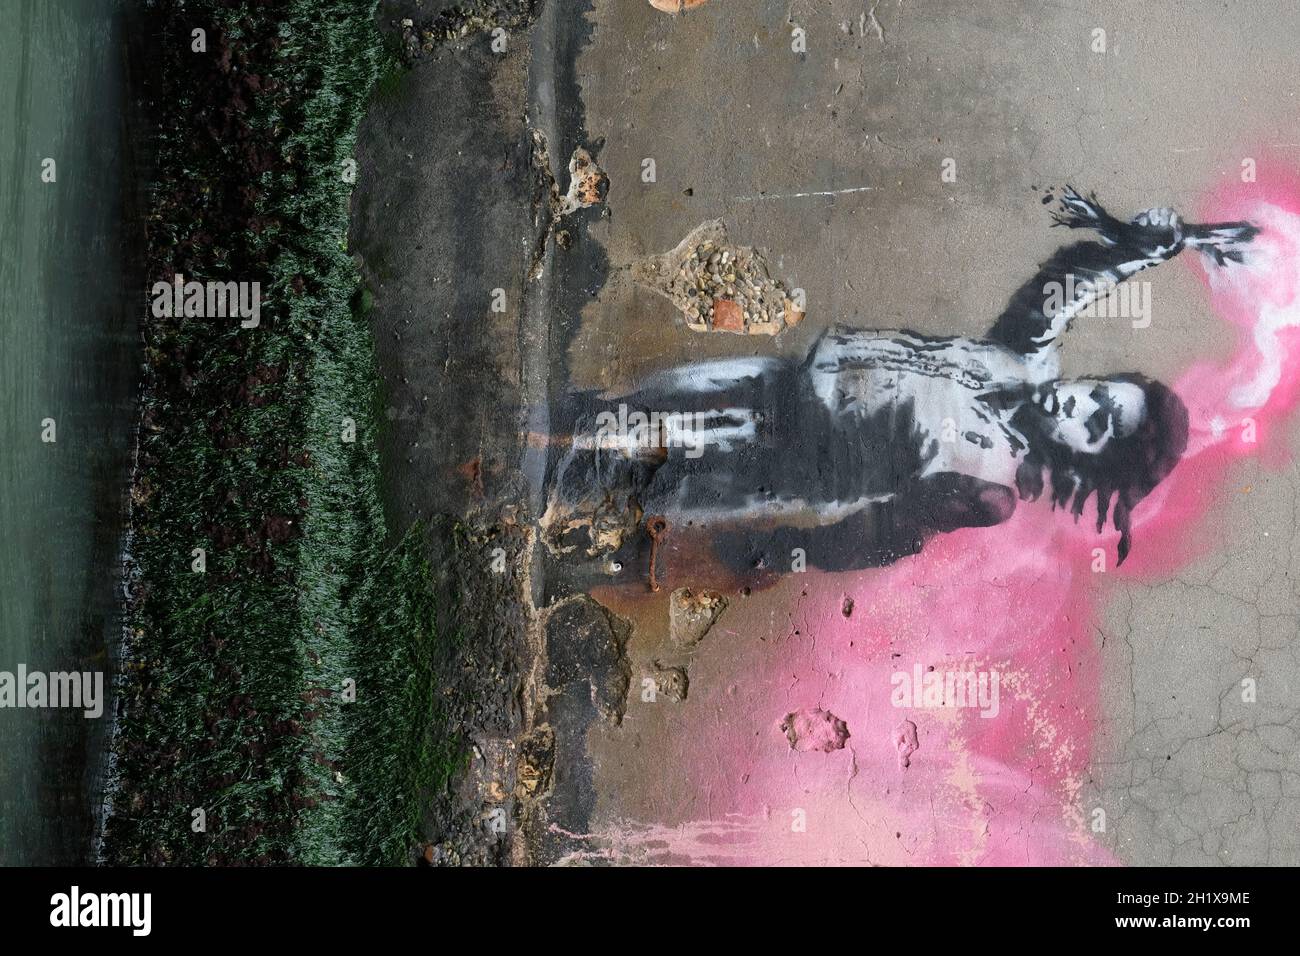 A new work of British street artist Banksy has been sighted in Venice on a building along the Rio de Ca Foscari canal in Venice, Italy May 15, 2019. Stock Photo